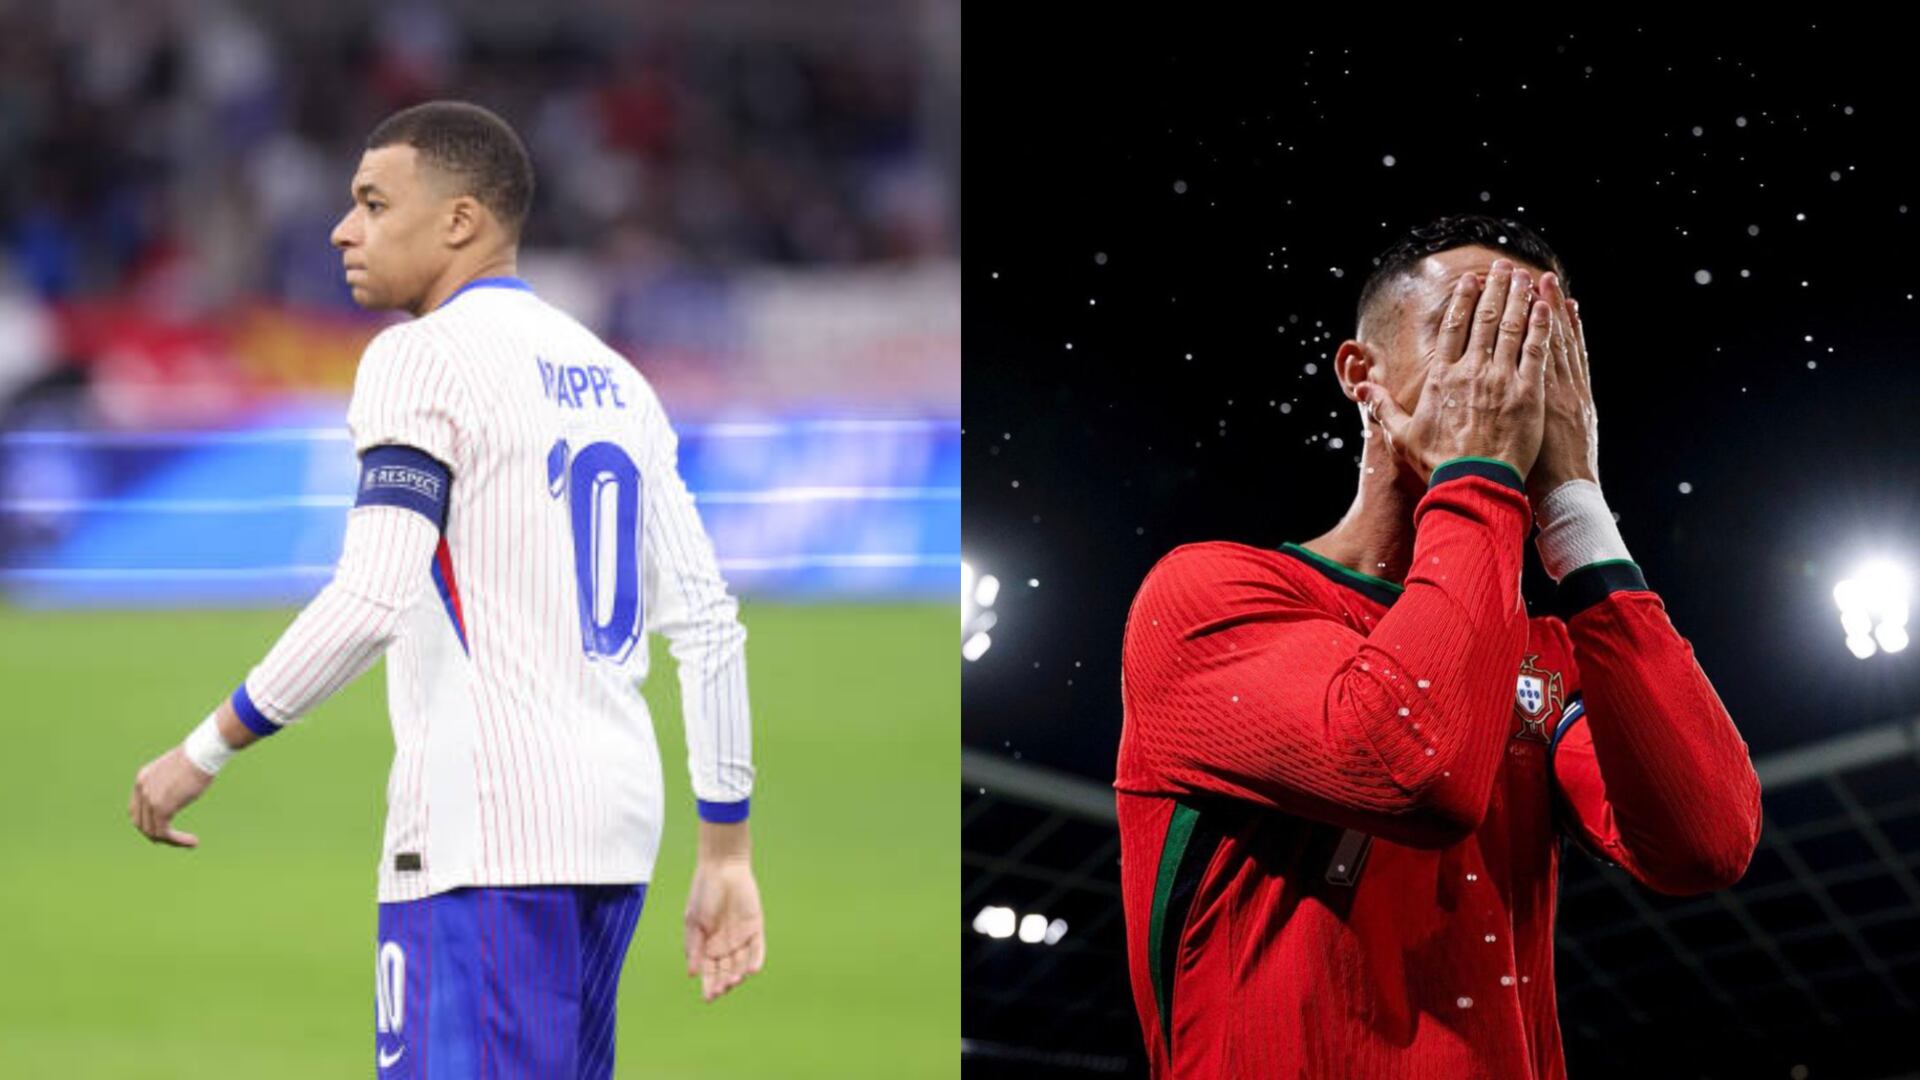 While Mbappé was whistled at home, Cristiano Ronaldo loses with Portugal